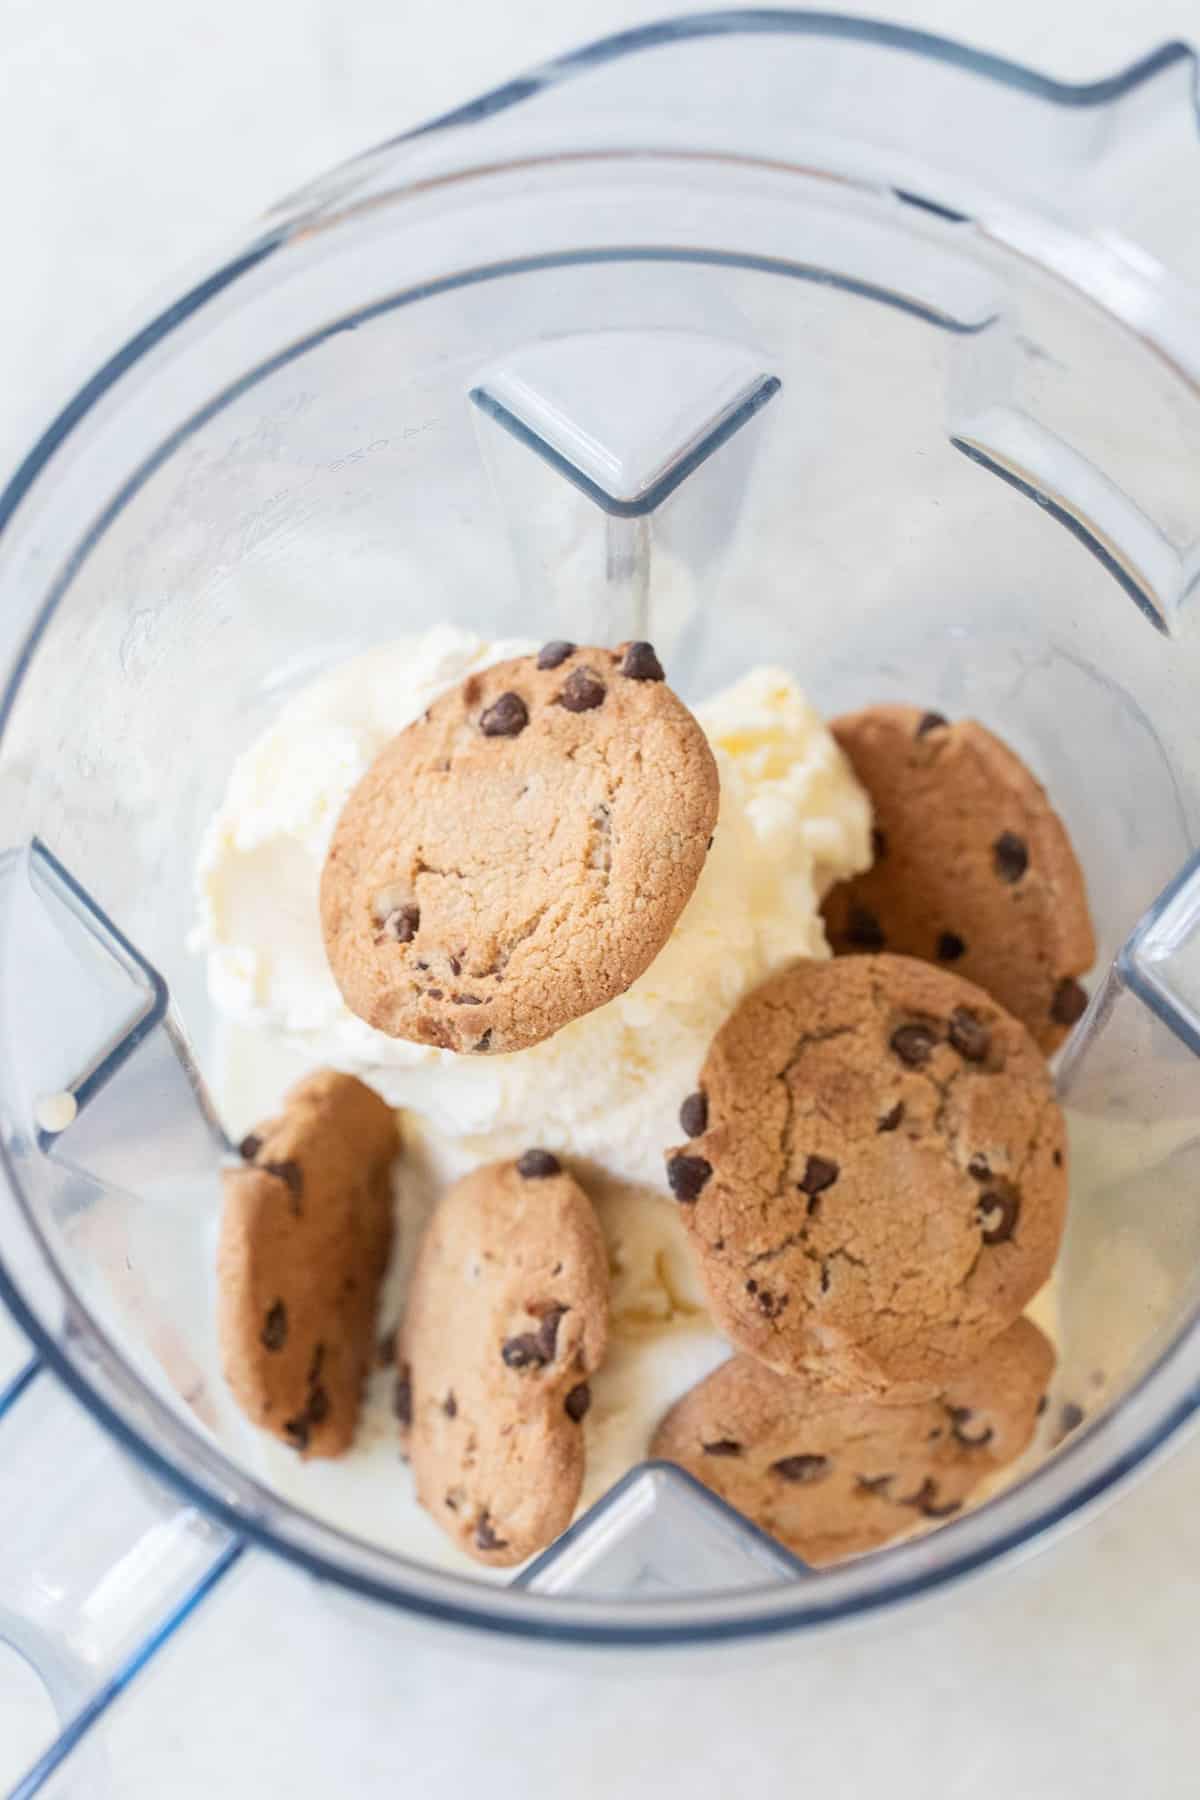 Chocolate chip cookies in a blender with ice cream.